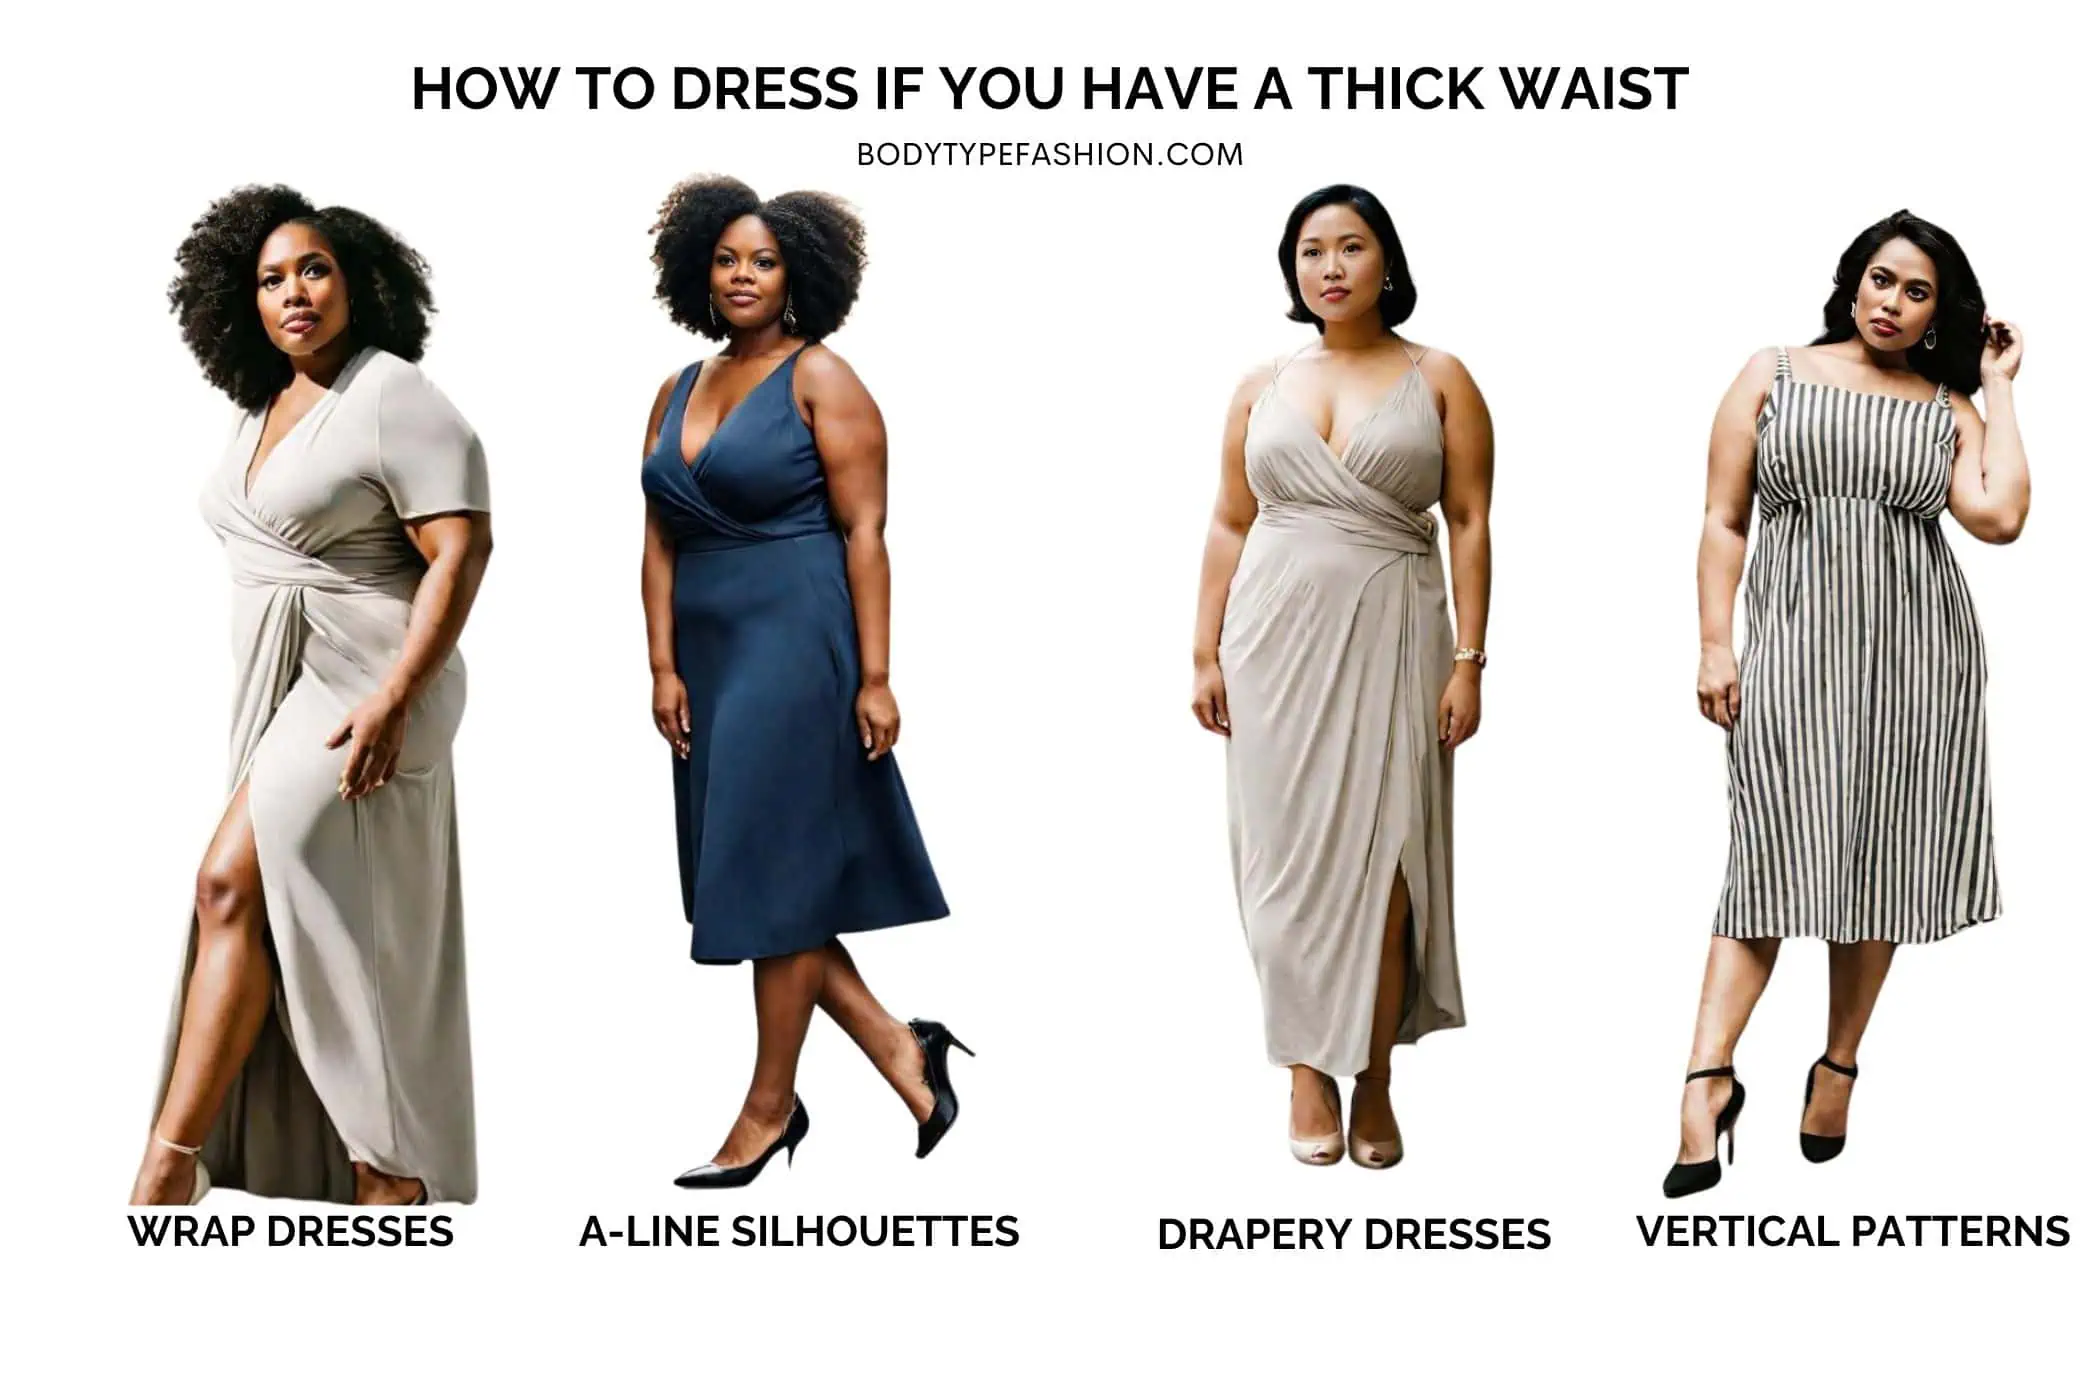 How to Dress if You Have a Thick Waist (The Complete Guide